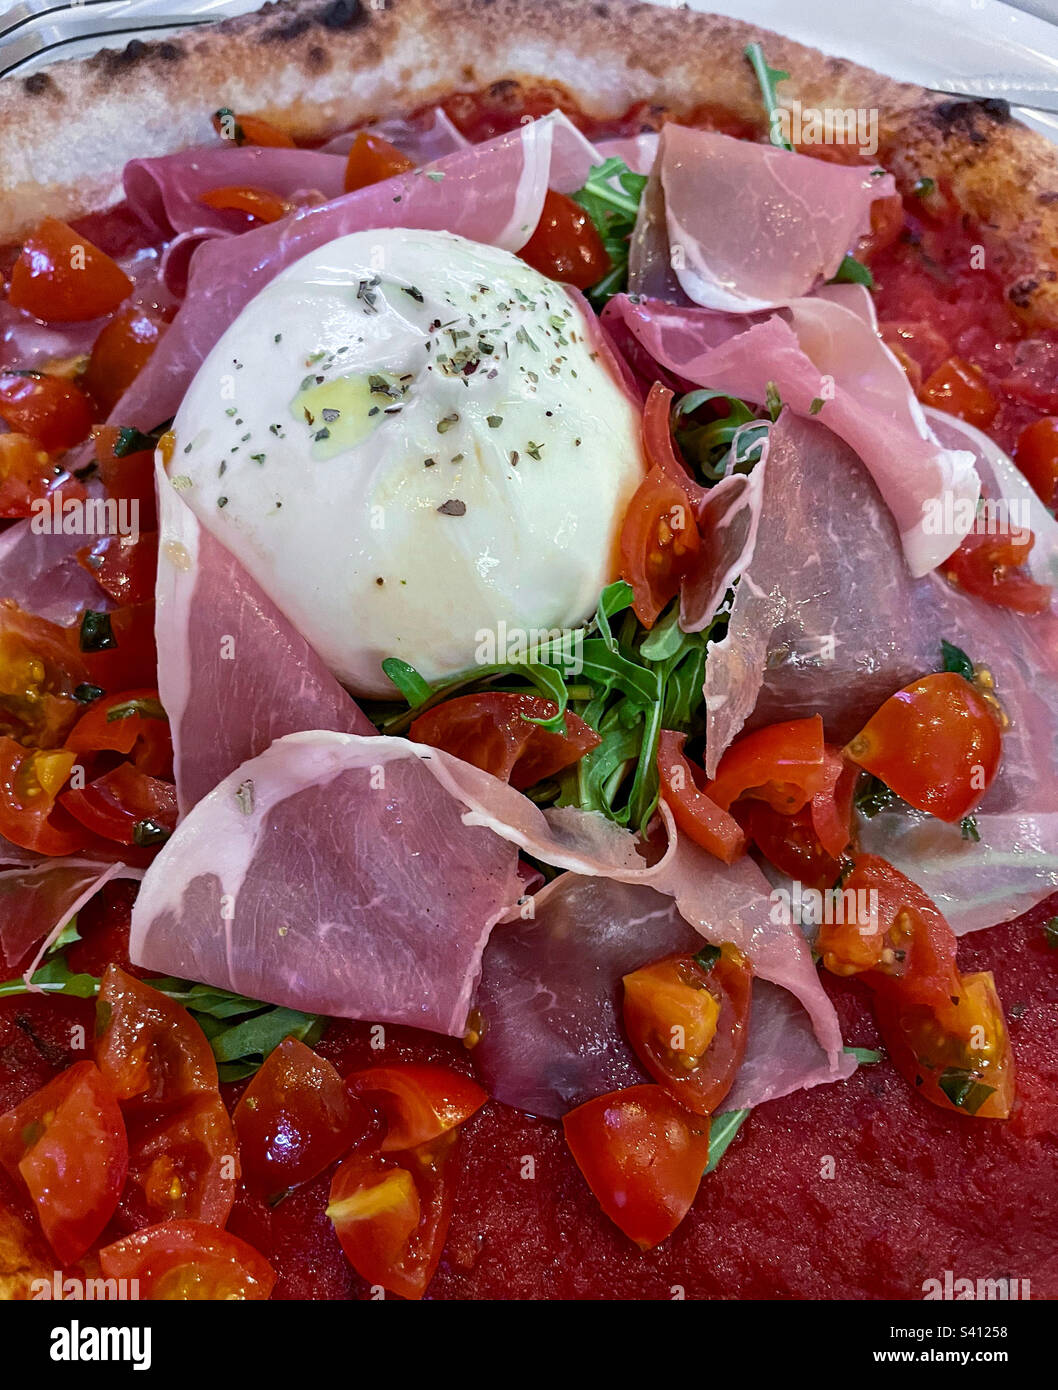 Close-up of Italian pizza with buffalo mozzarella, chopped tomatoes, prosciutto ham, arugula, sprinkled with oregano and olive oil on a thin crust with thick tomato sauce, photographed from overhead Stock Photo